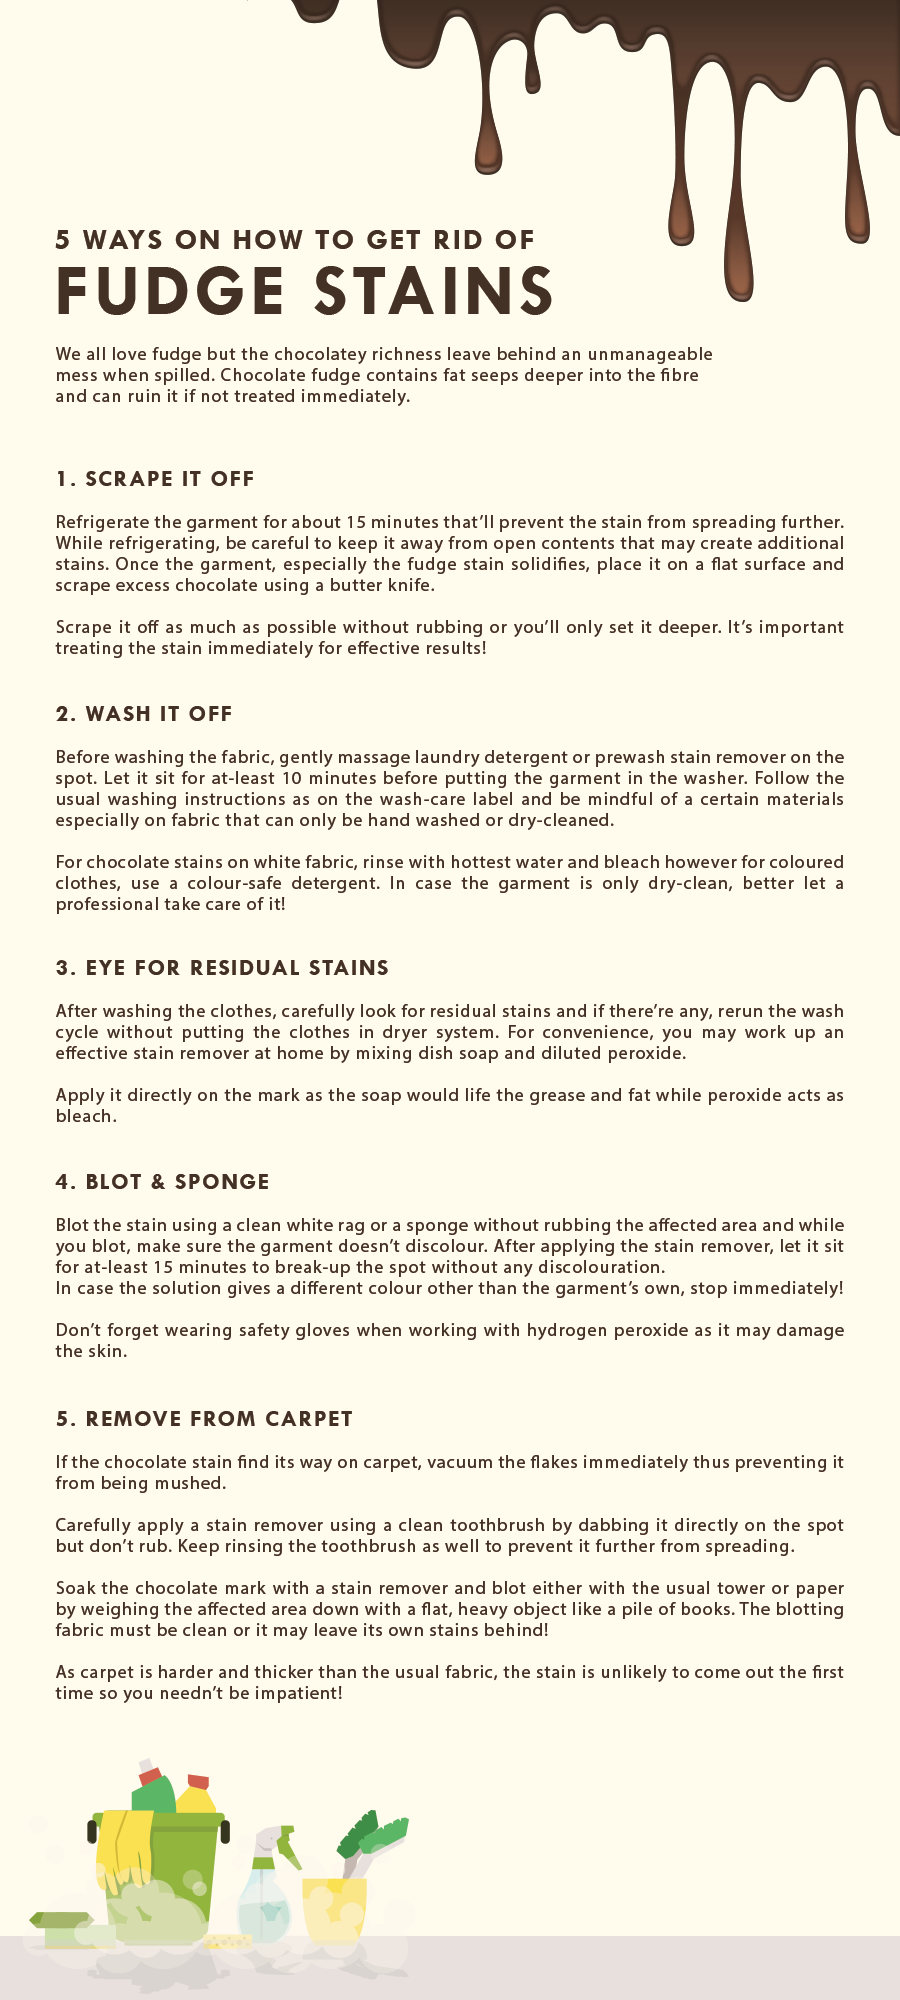 Fudge Stains and how to get rid of them infographic